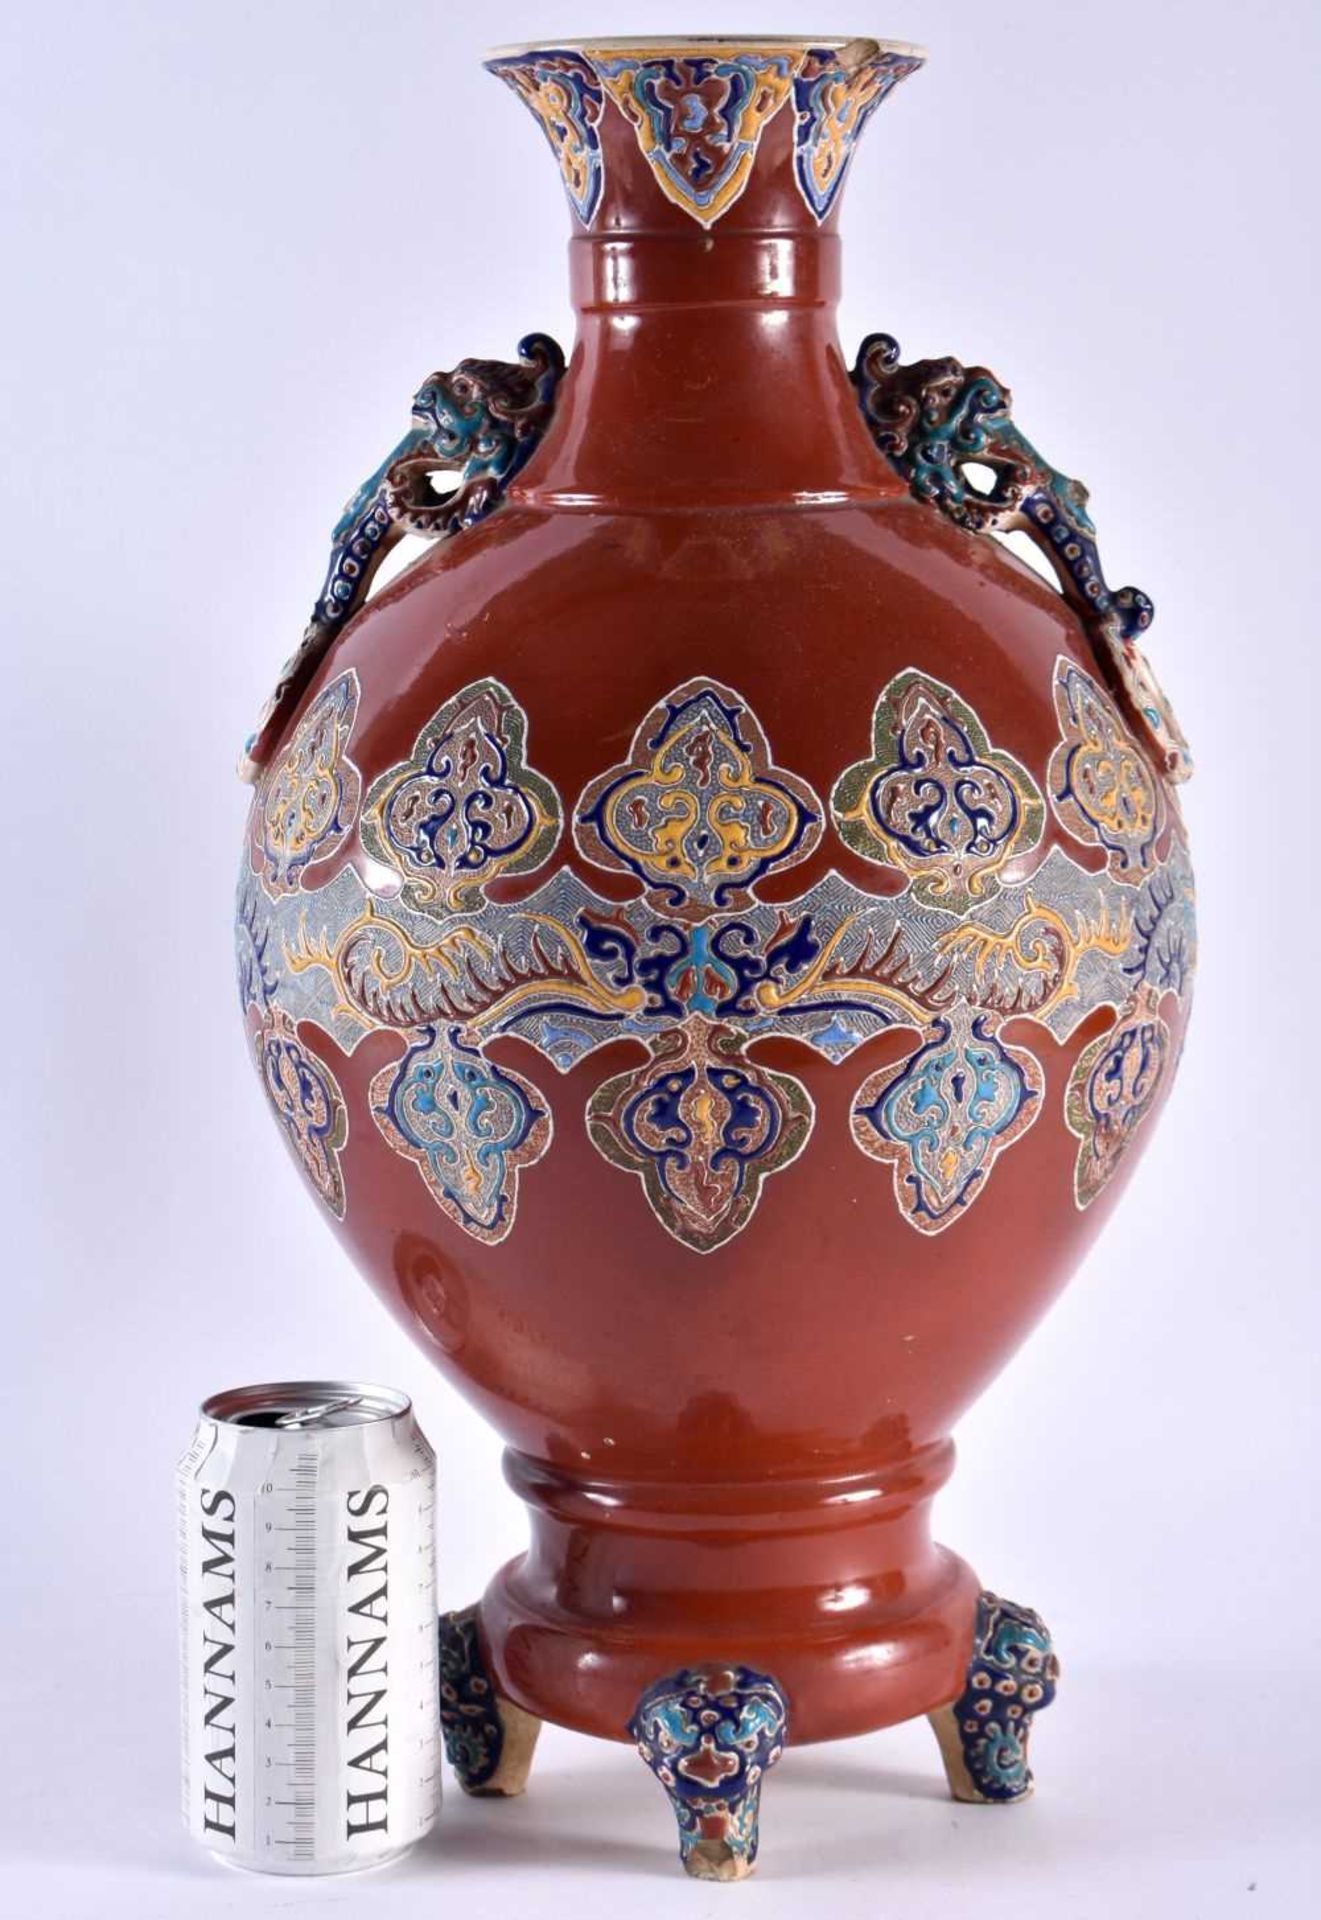 A LARGE 19TH CENTURY JAPANESE MEIJI PERIOD TWIN HANDLED SATSUMA VASE enamelled with motifs, with